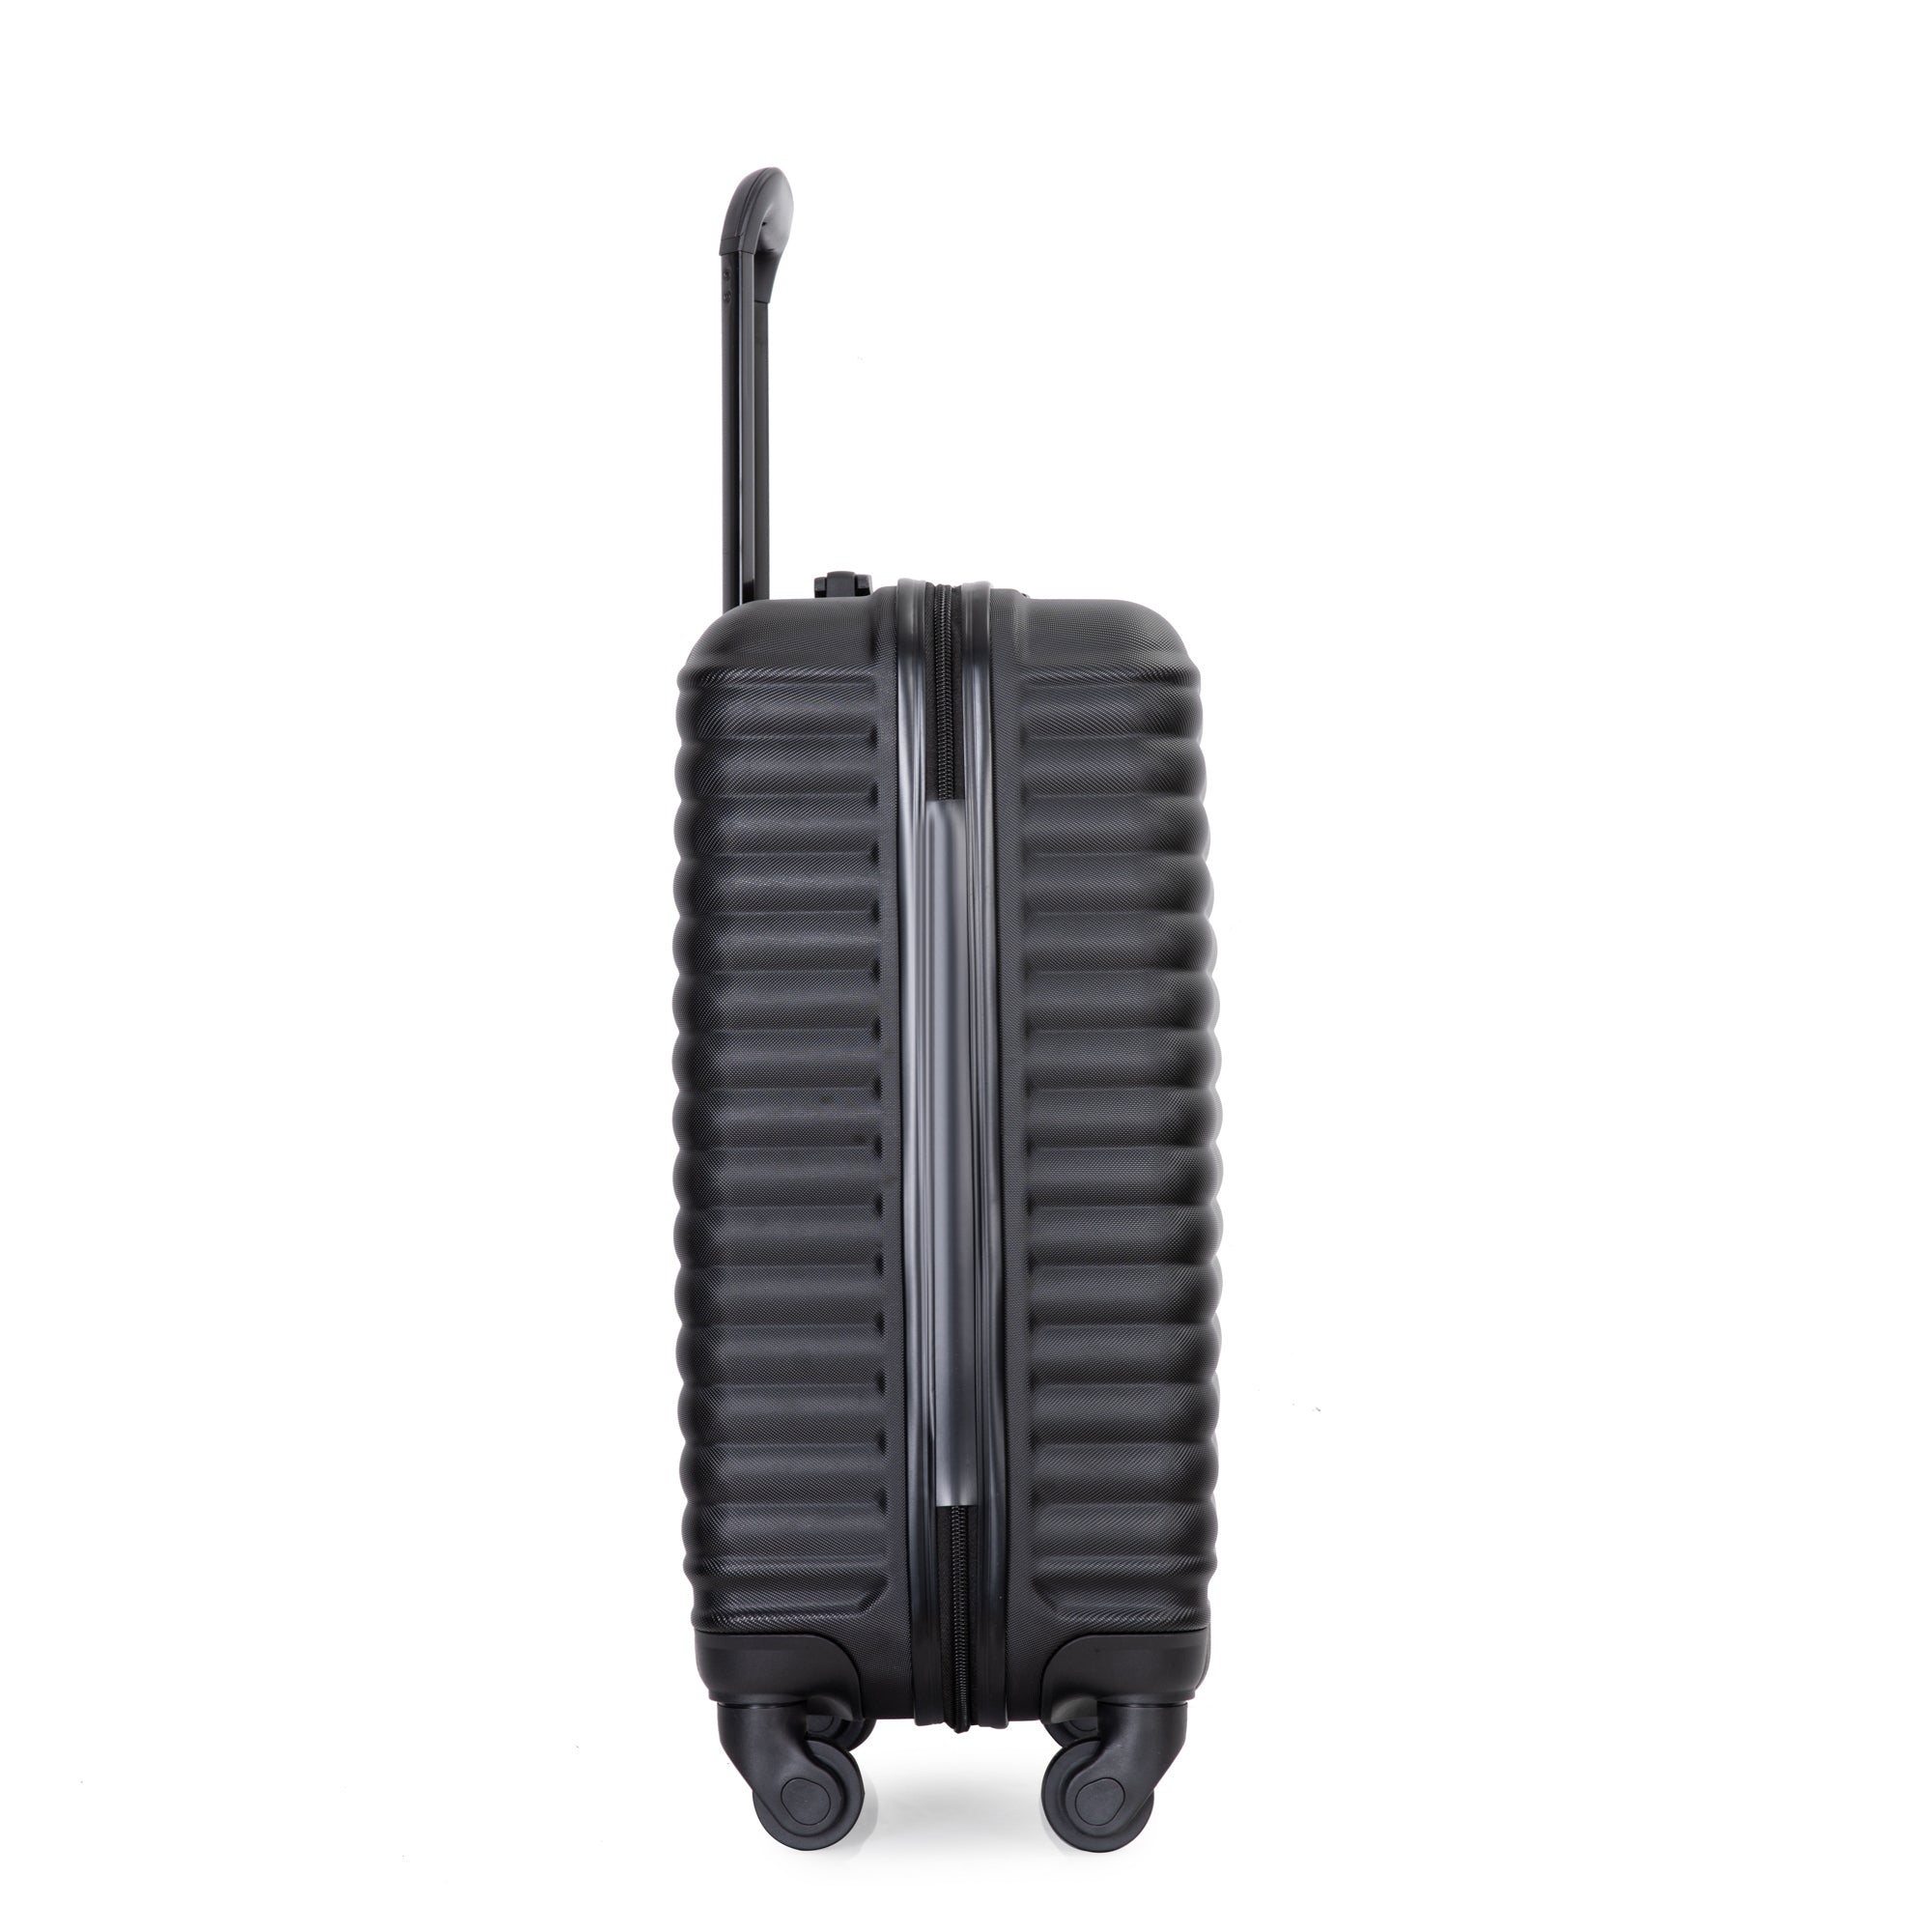 20" Carry on Luggage Lightweight Suitcase, Spinner black-abs